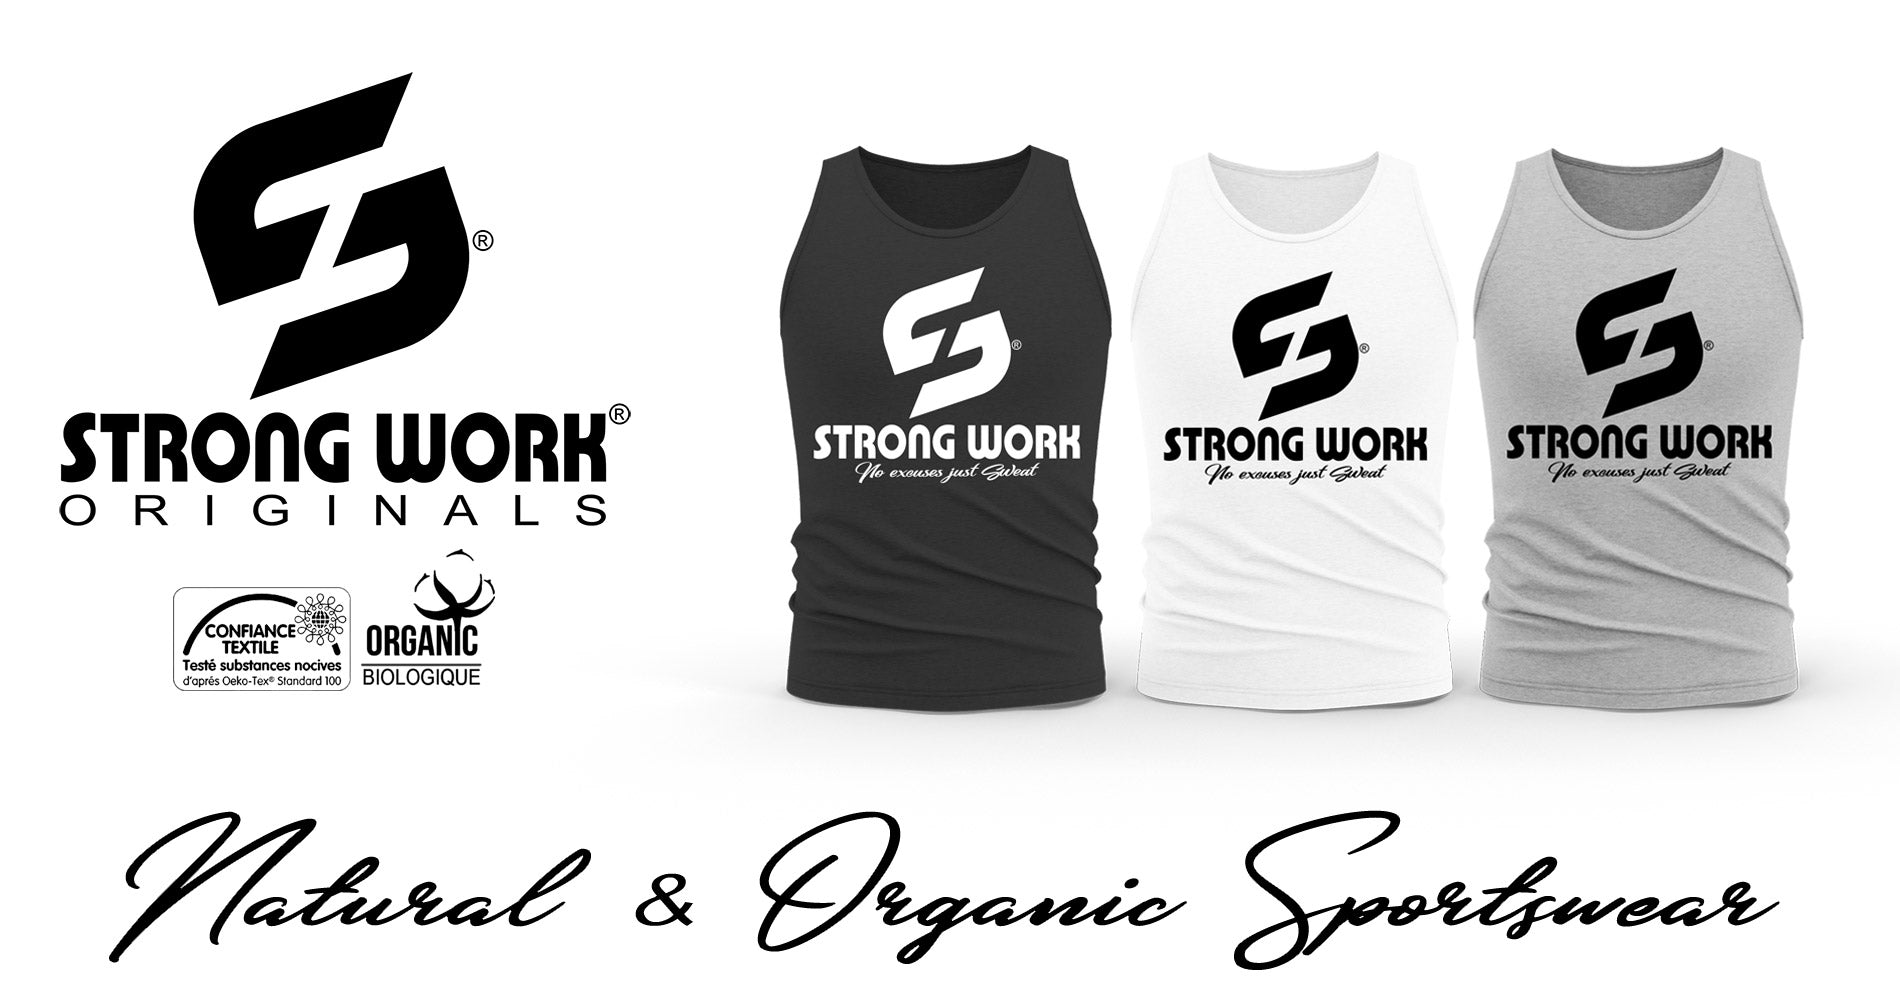 NEW STRONG WORK TANK TOP FOR MEN AND WOMEN